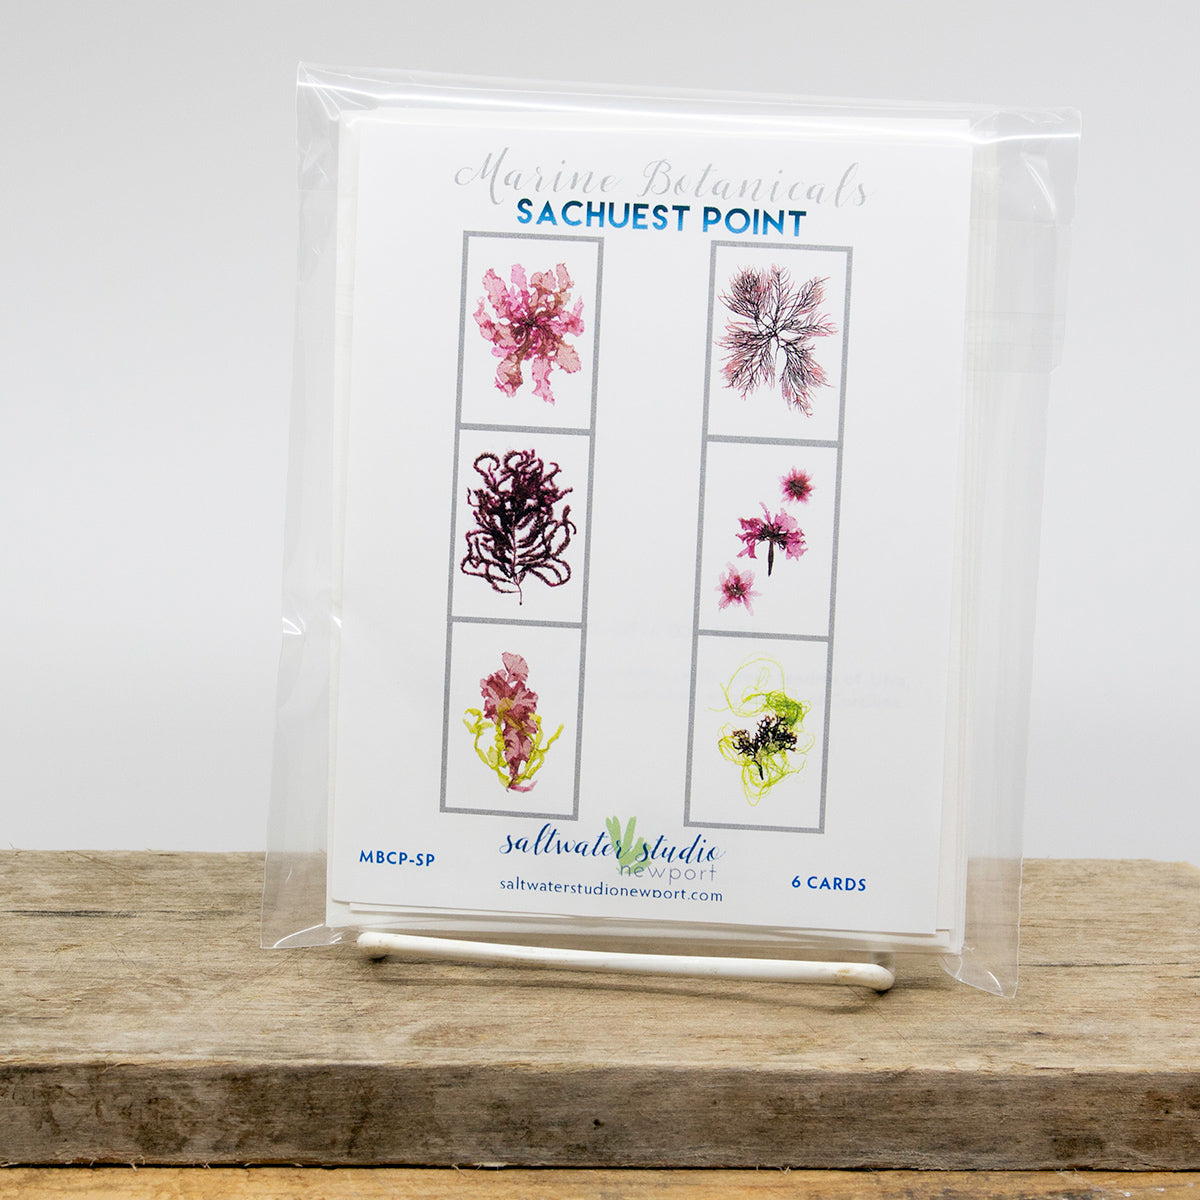 Sachuest Point Card Package